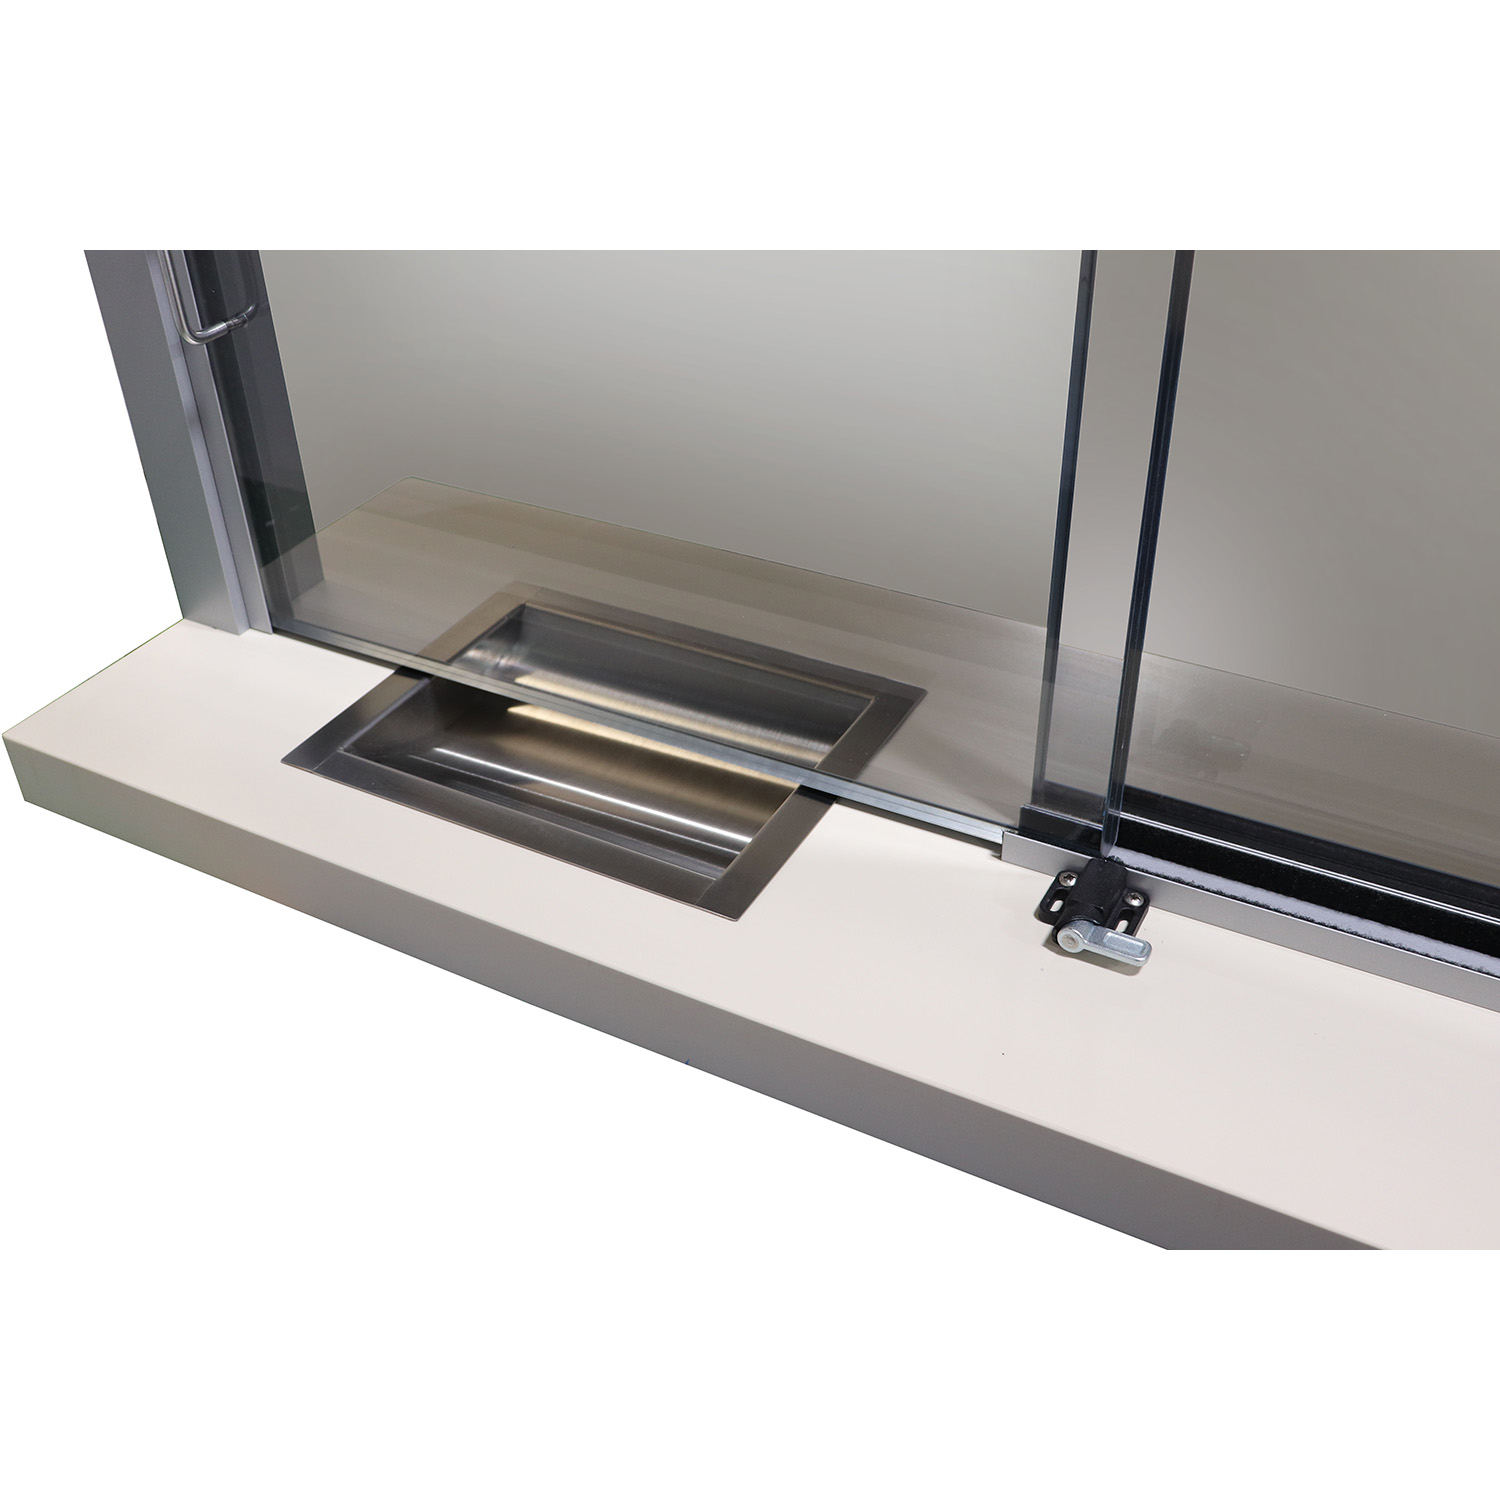 Slider Transaction Window with bullet resistant counter 2